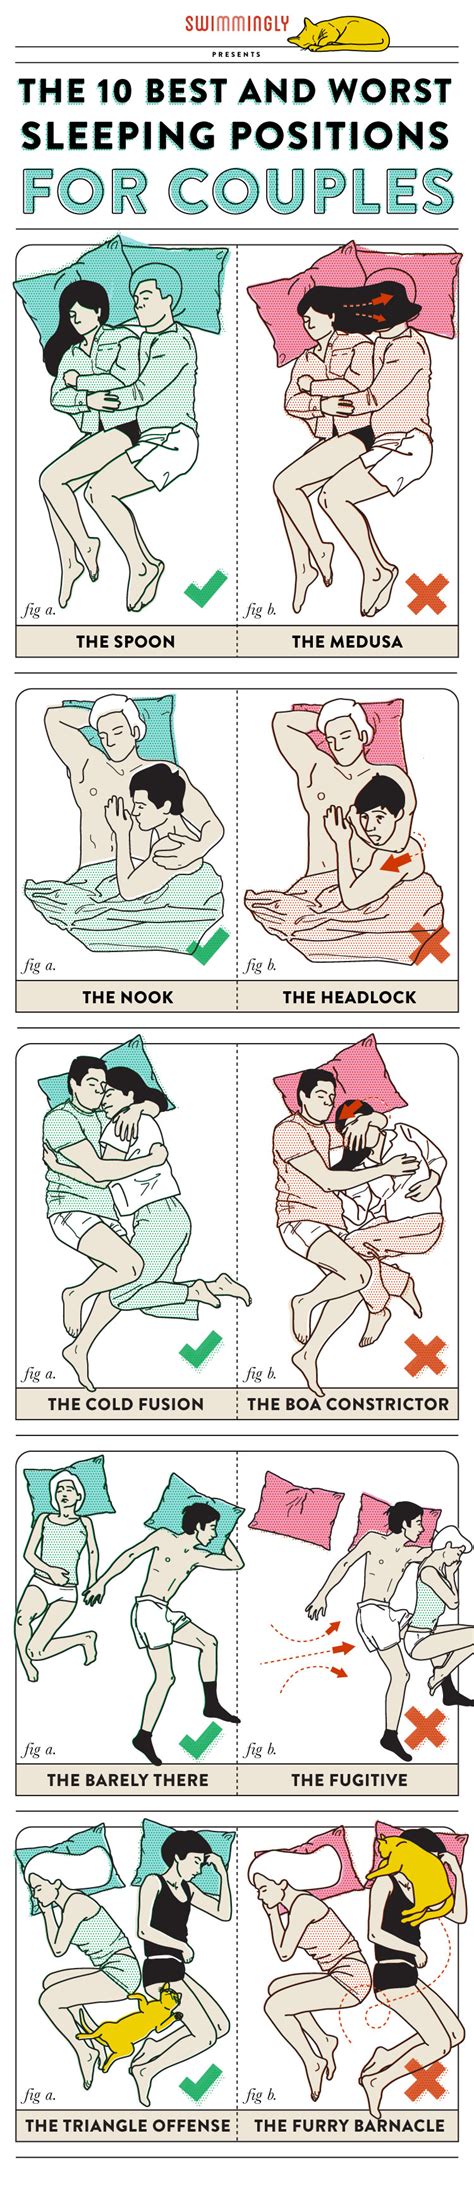 The Best And Worst Sleeping Positions For Couples Will